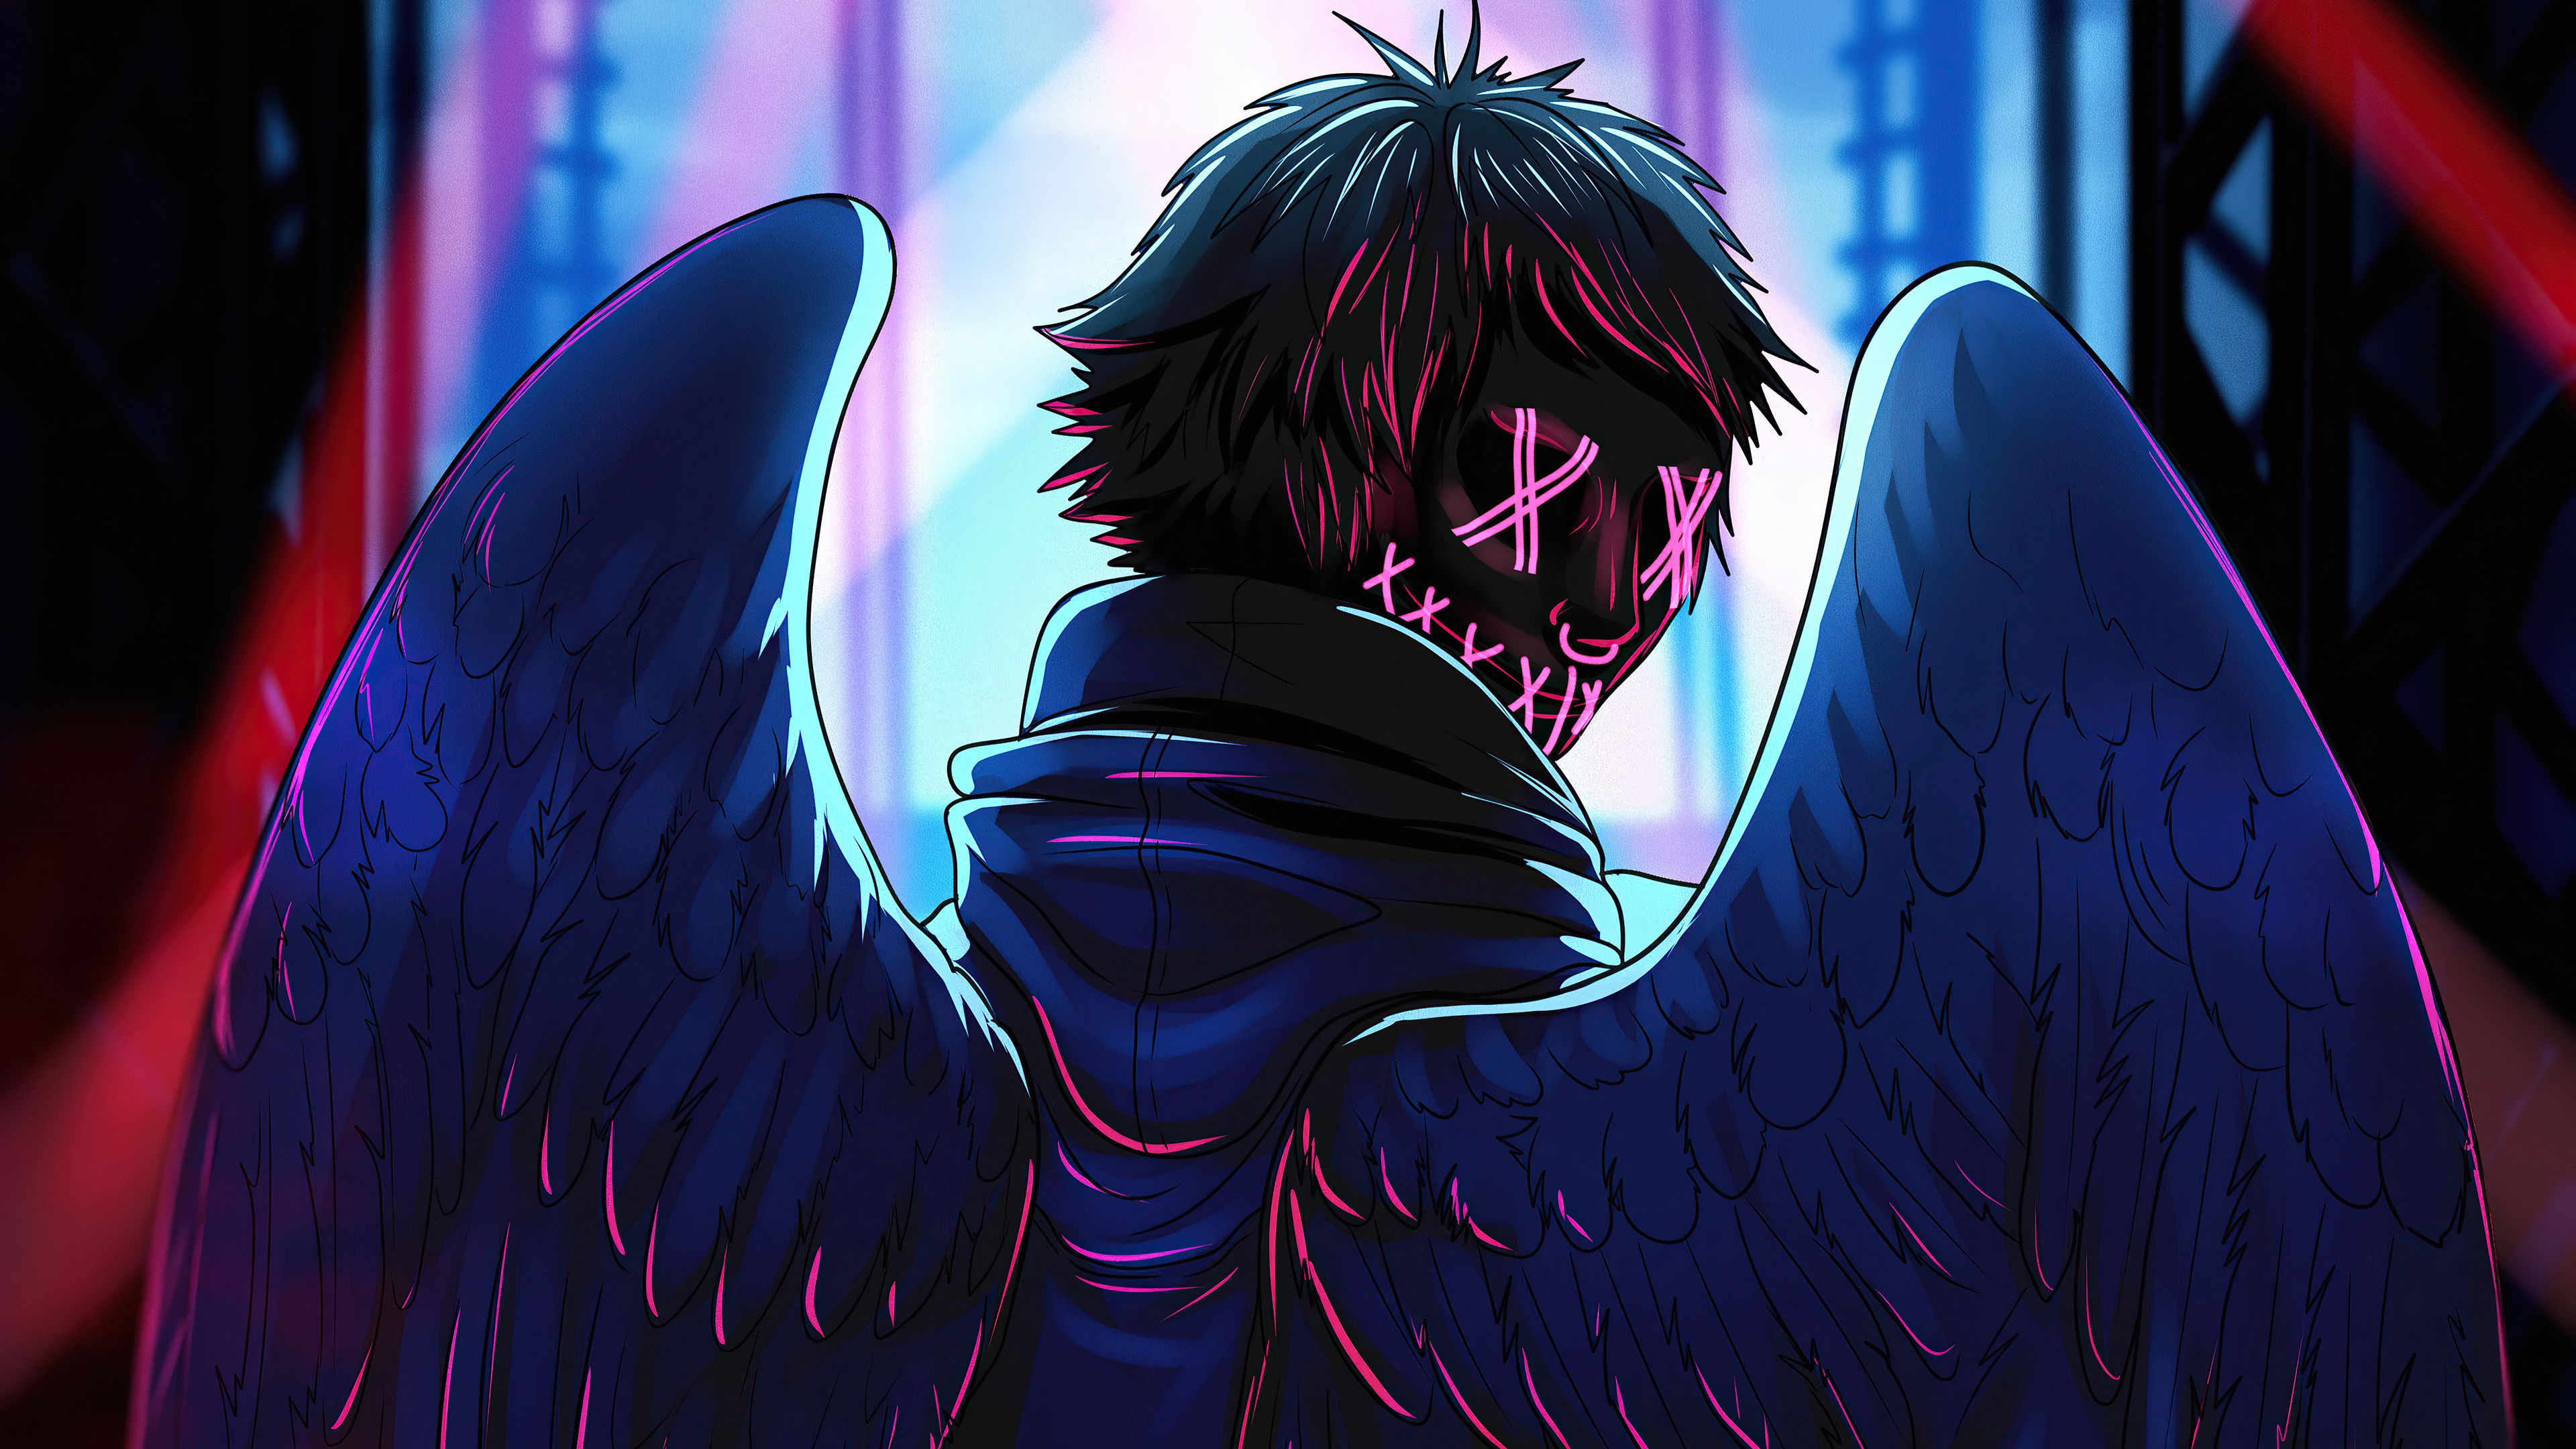 Neon Angel Boy 4k Nexus Samsung Galaxy Tab Note Android Tablets HD 4k Wallpaper, Image, Background, Photo and Picture